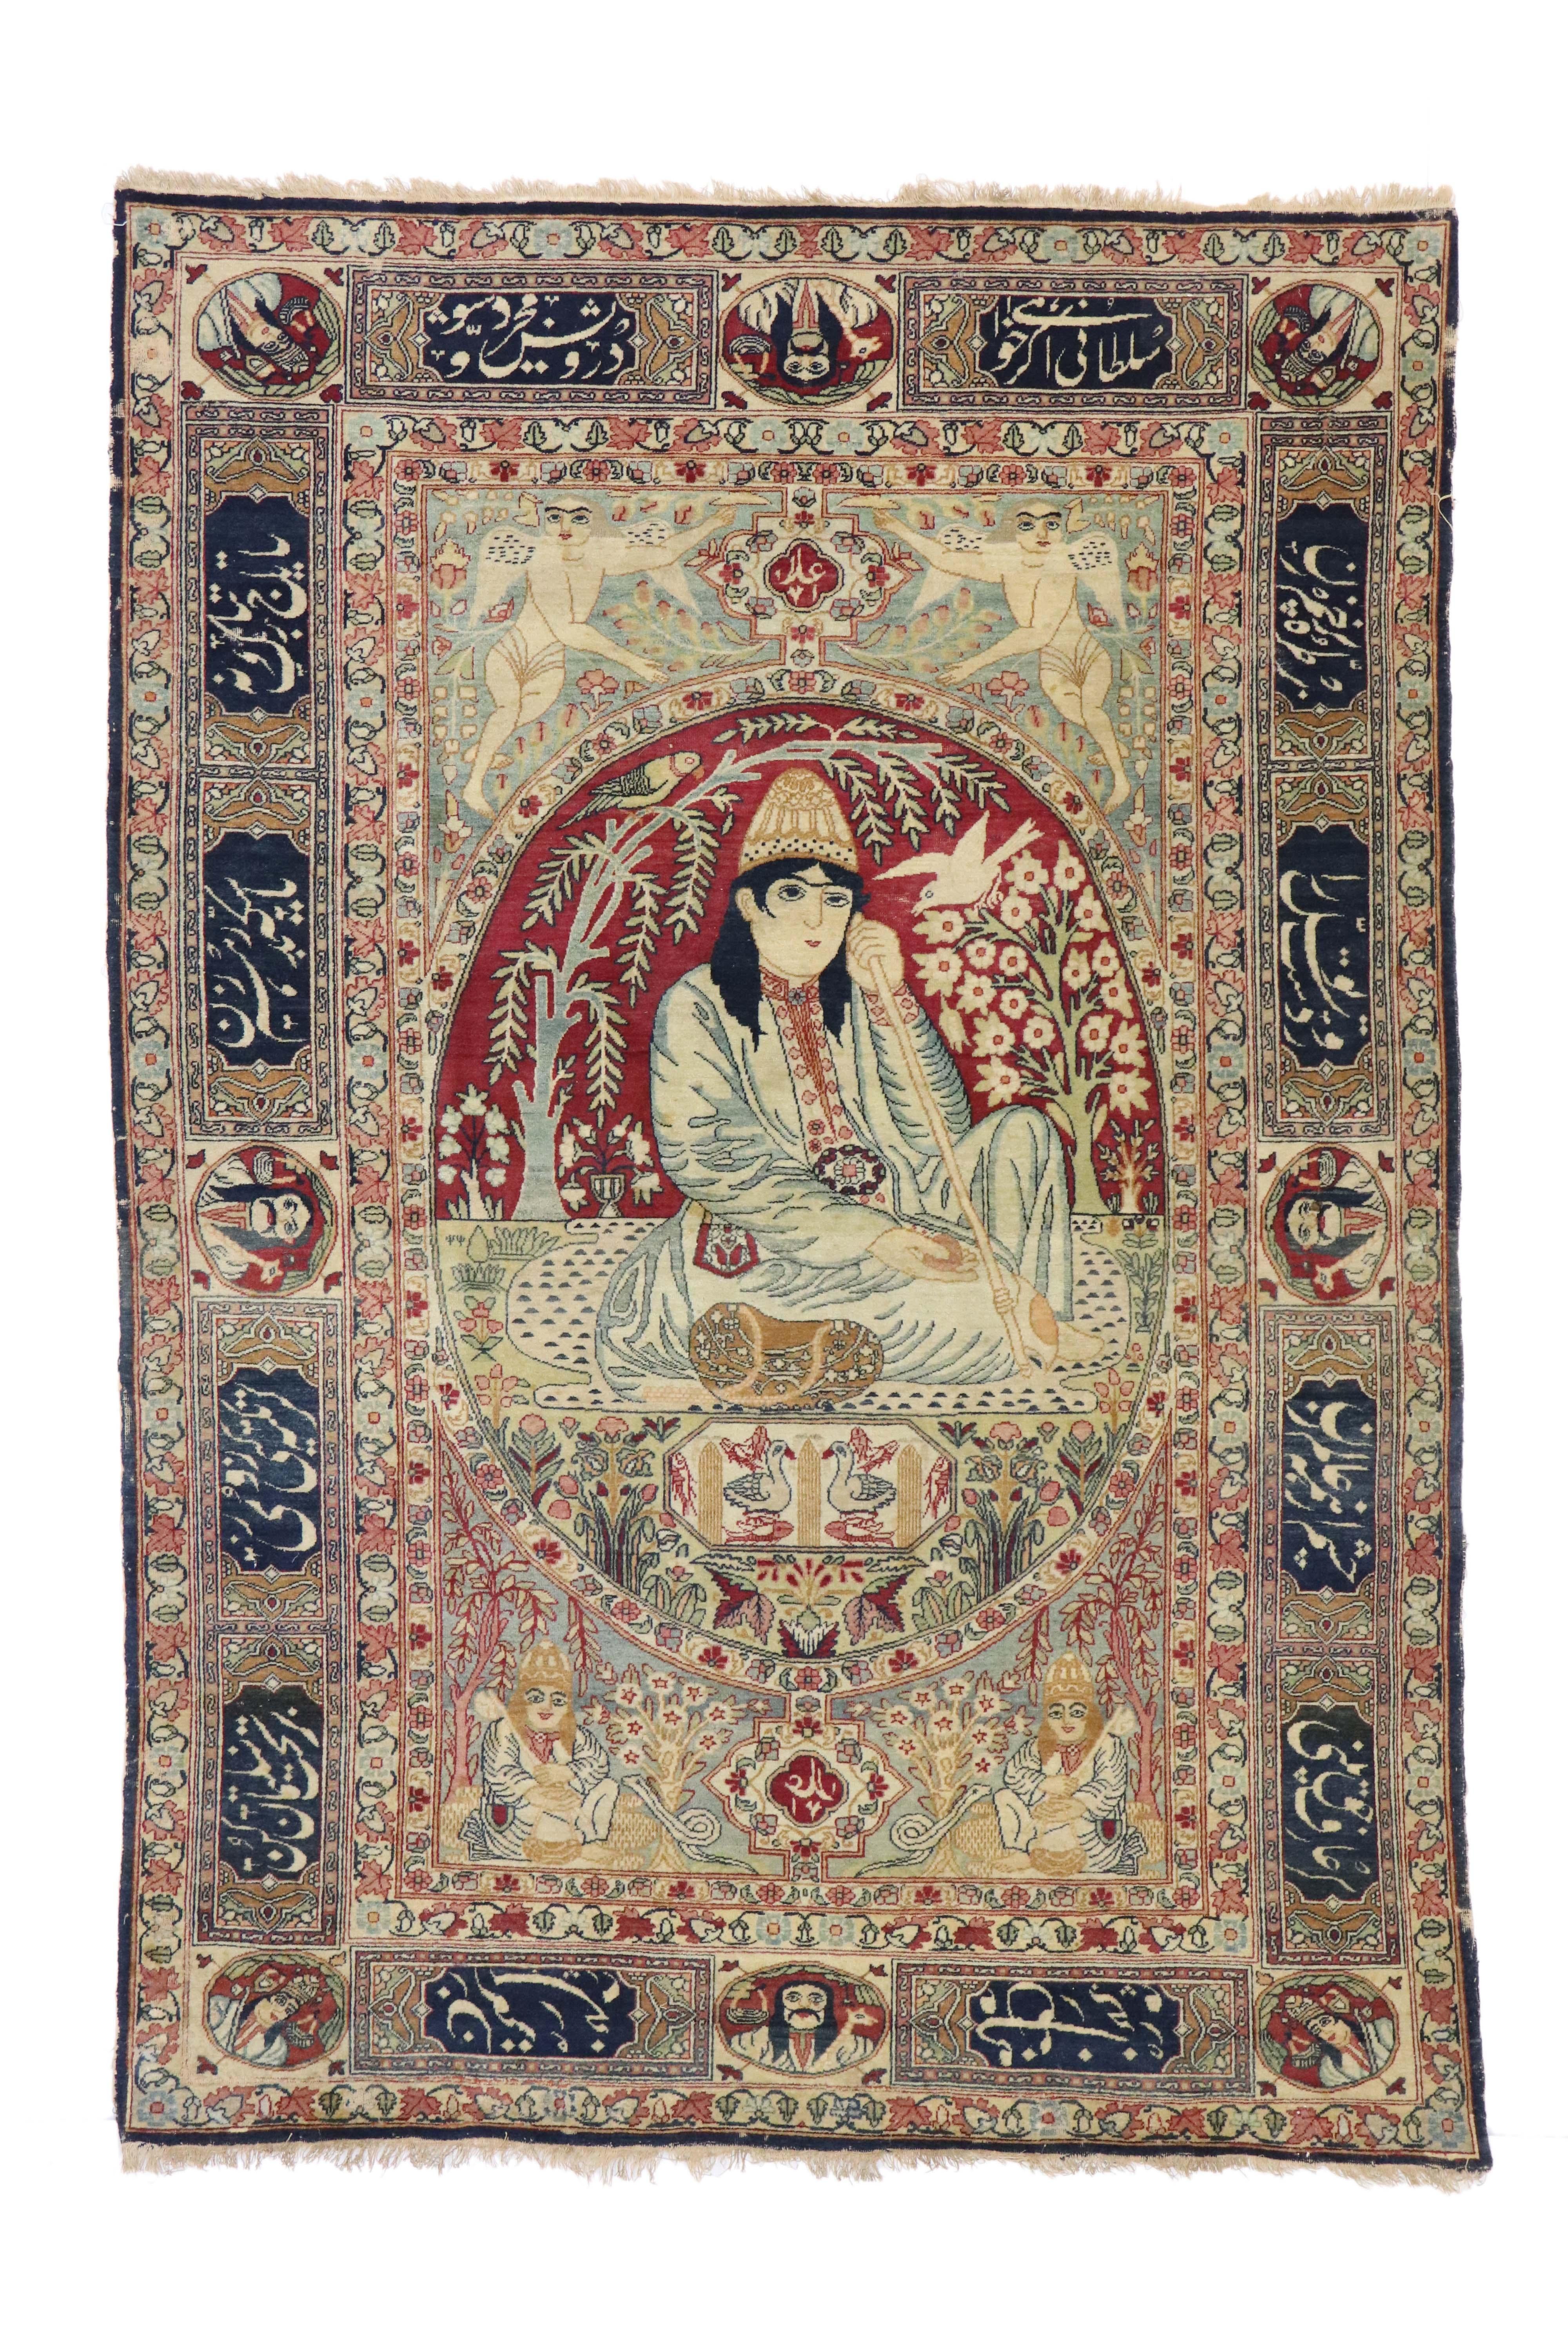 74336 Antique Persian Kerman Pictorial Rug, Dervish under Willow Tree Tapestry. Drawing inspiration from Nur Ali Shah, this antique Persian Kirman rug displays an expressive pictorial rug of a Dervish under a willow tree. In the center and